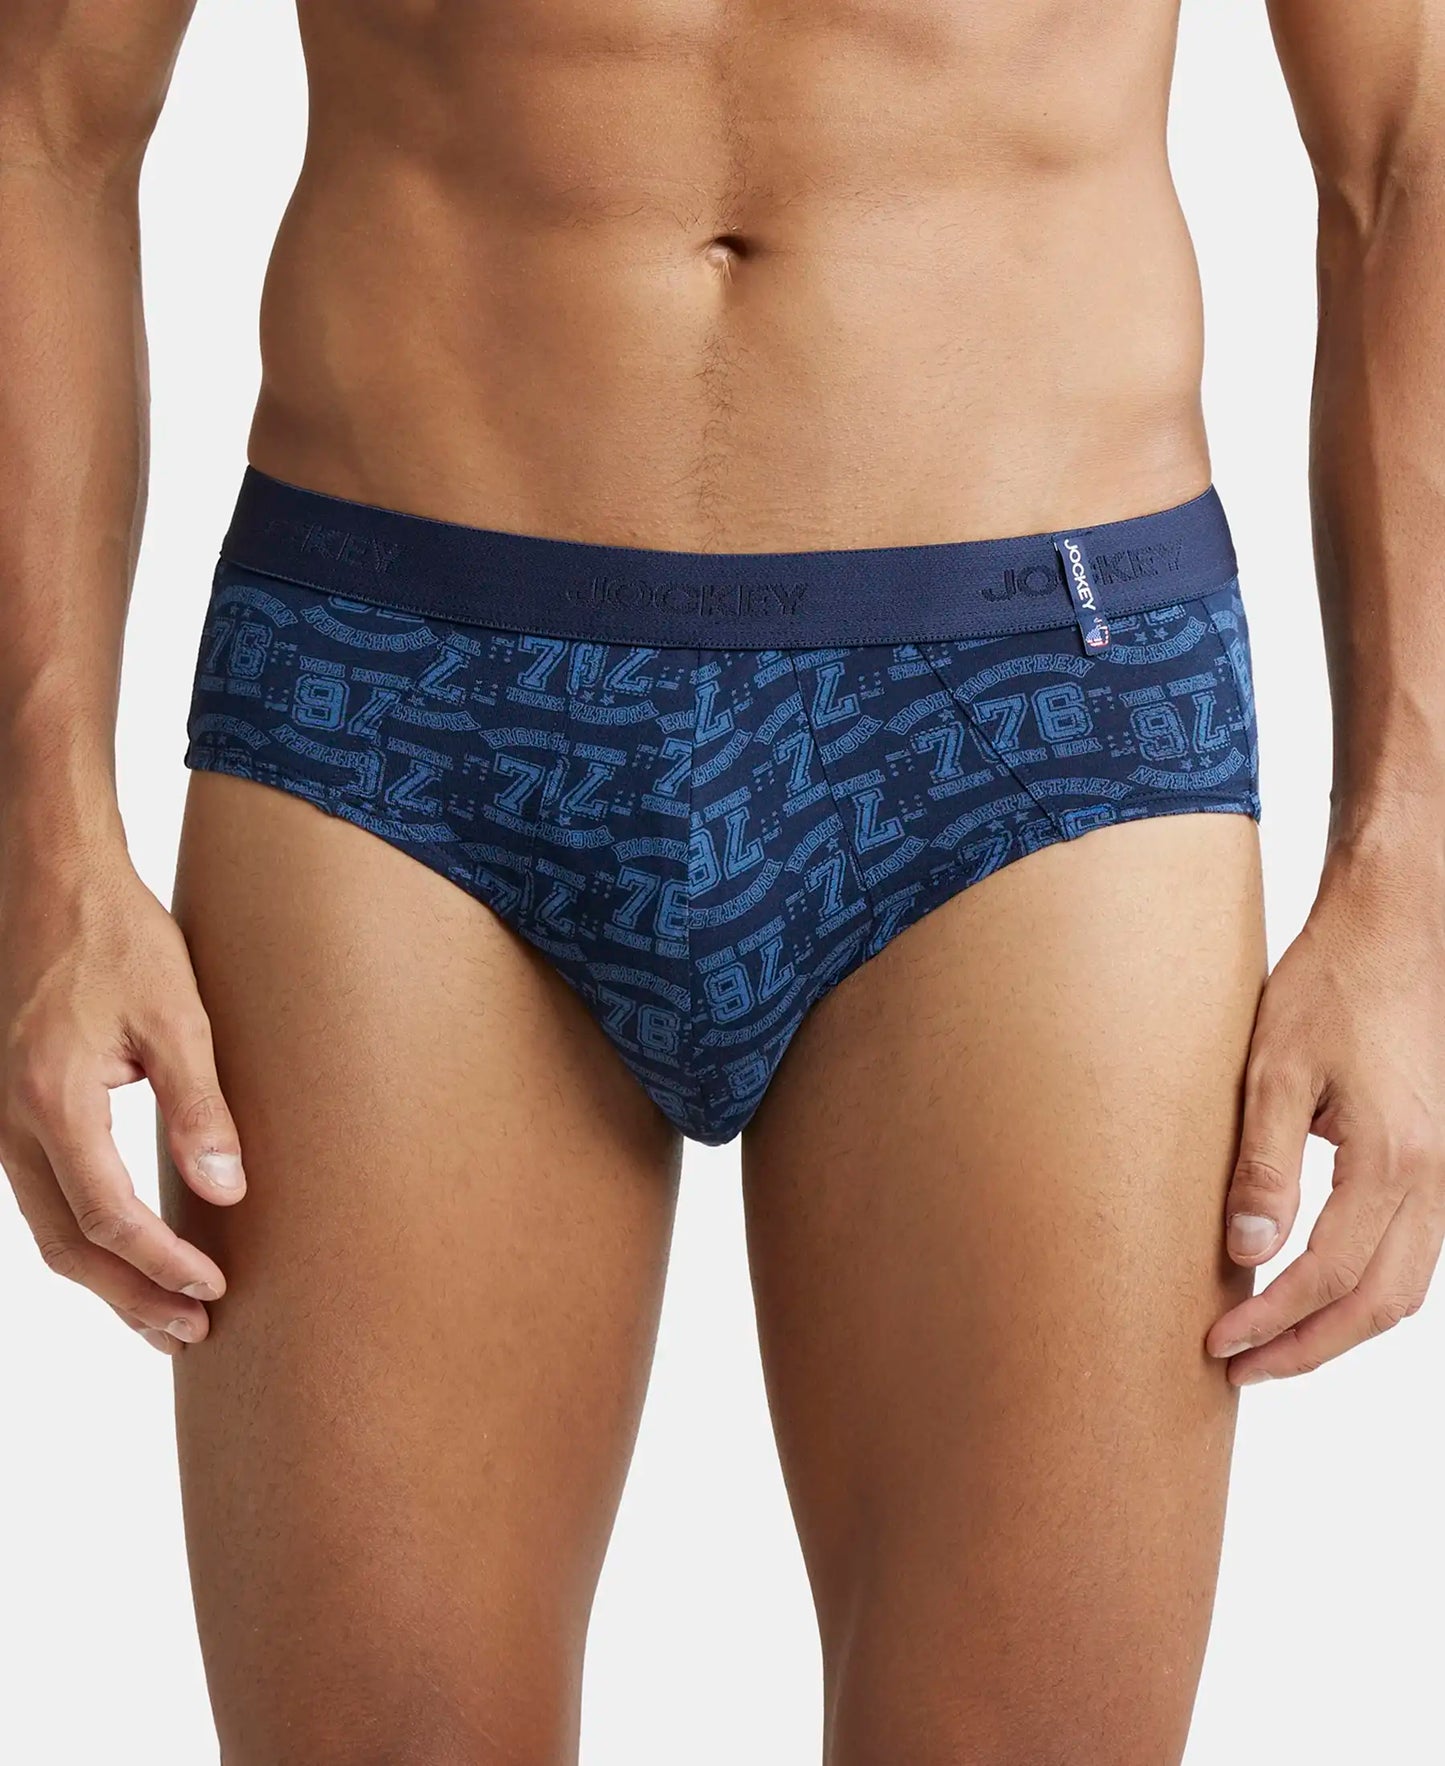 Super Combed Cotton Printed Brief with Ultrasoft Waistband - Navy Dusk Blue-3